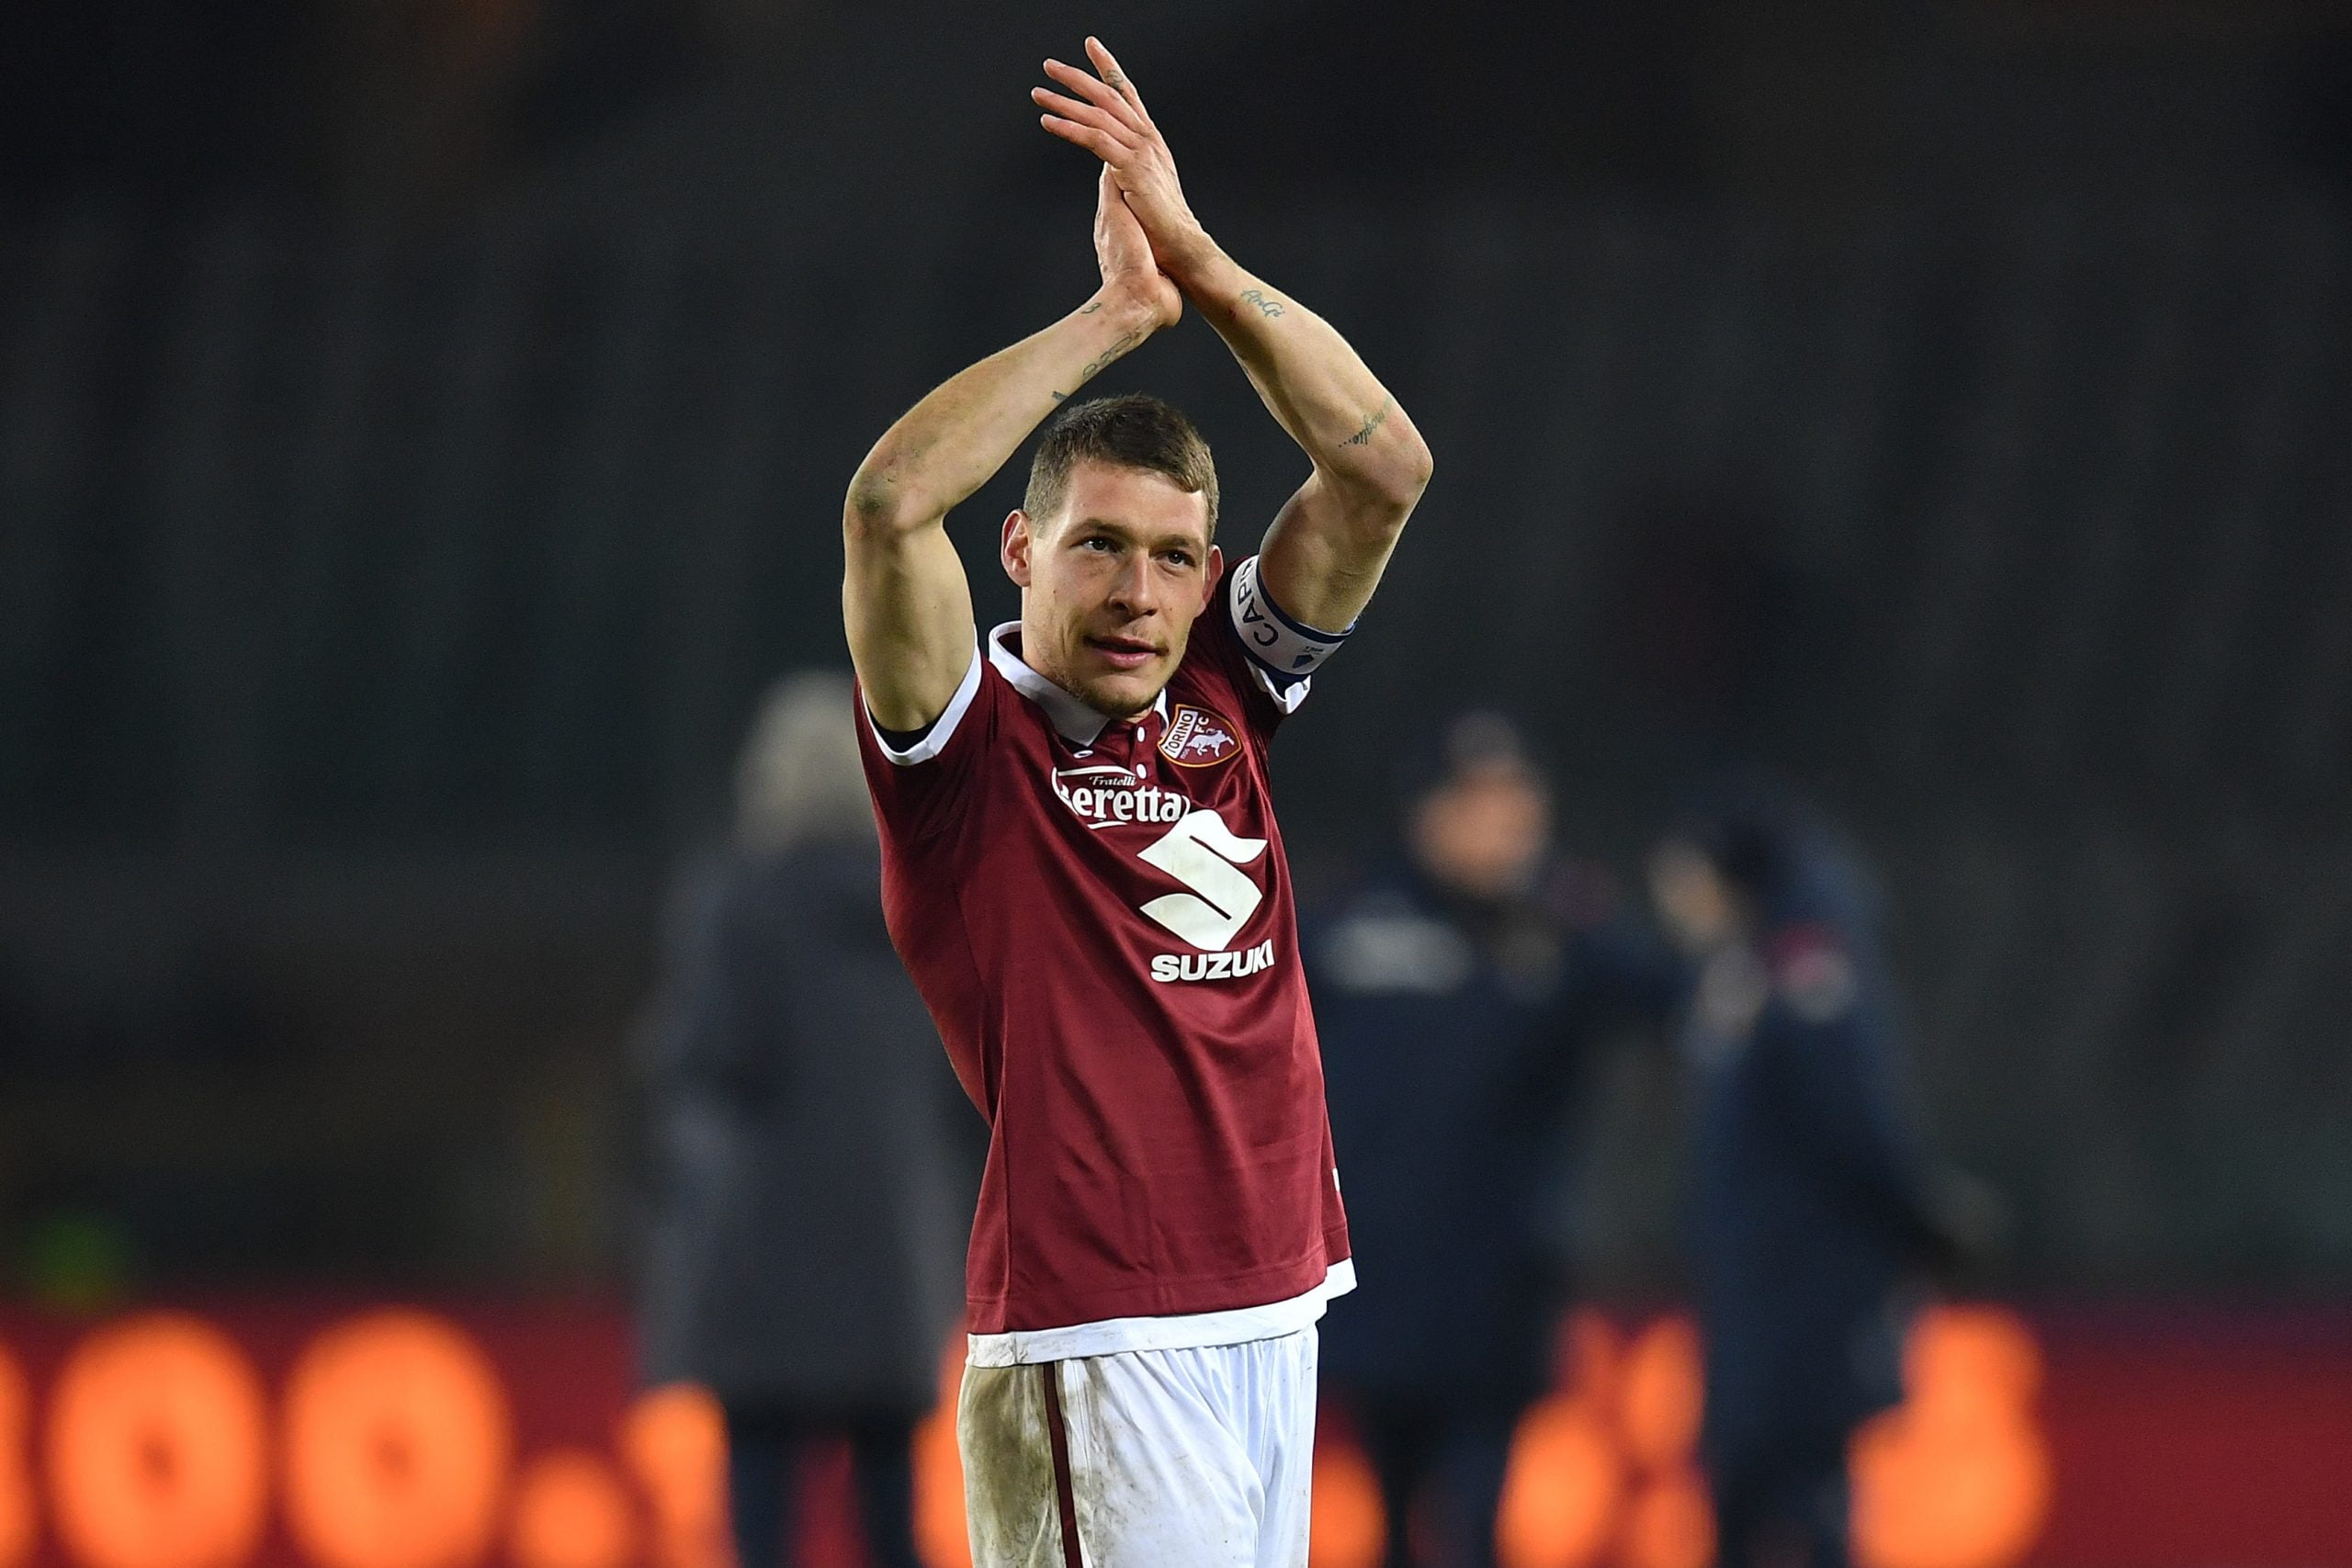 Everton ready to launch a summer move for Andrea Belotti who is clapping in the picture